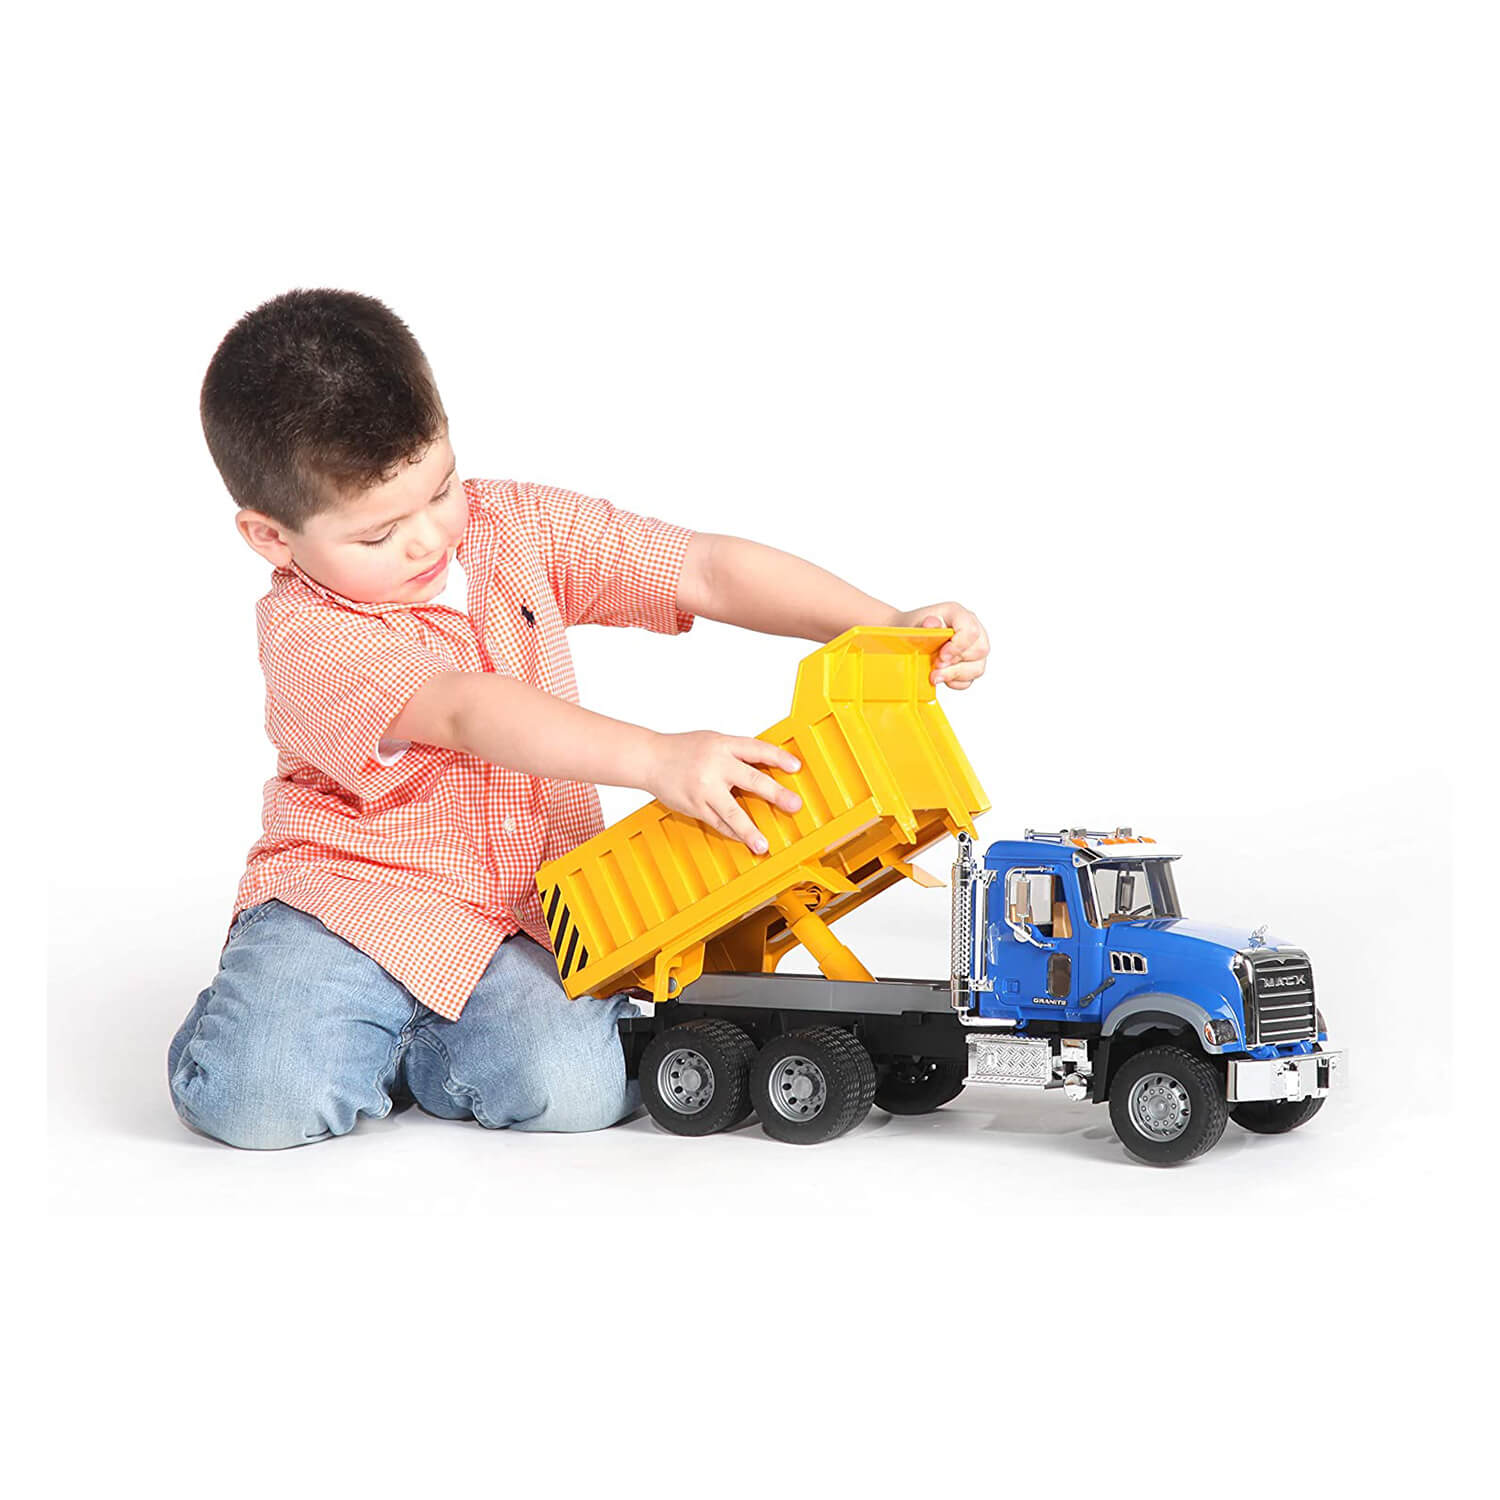 Kid playing with the dump truck.